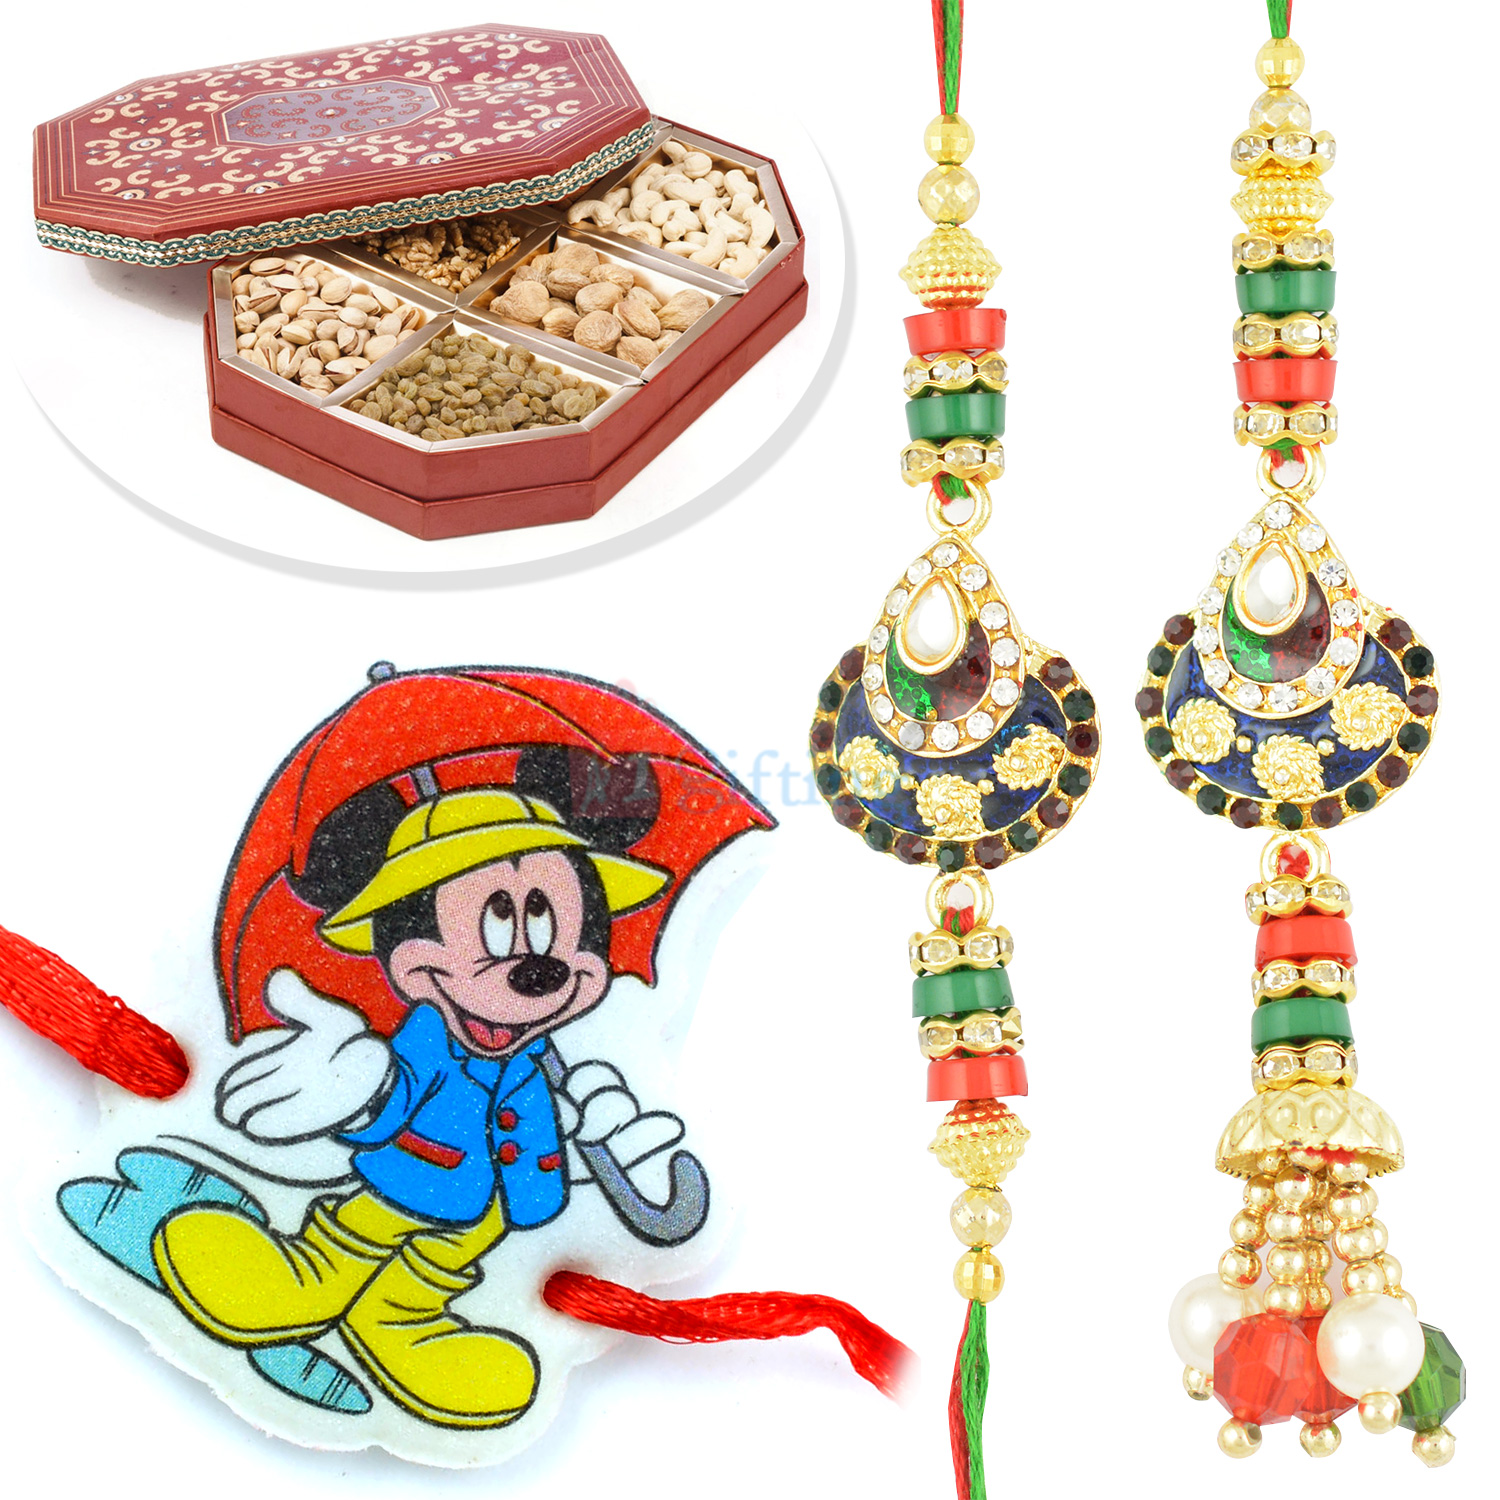 Antique Look Pair and Mickey Mouse Kids Rakhi with 6 type Dryfruits